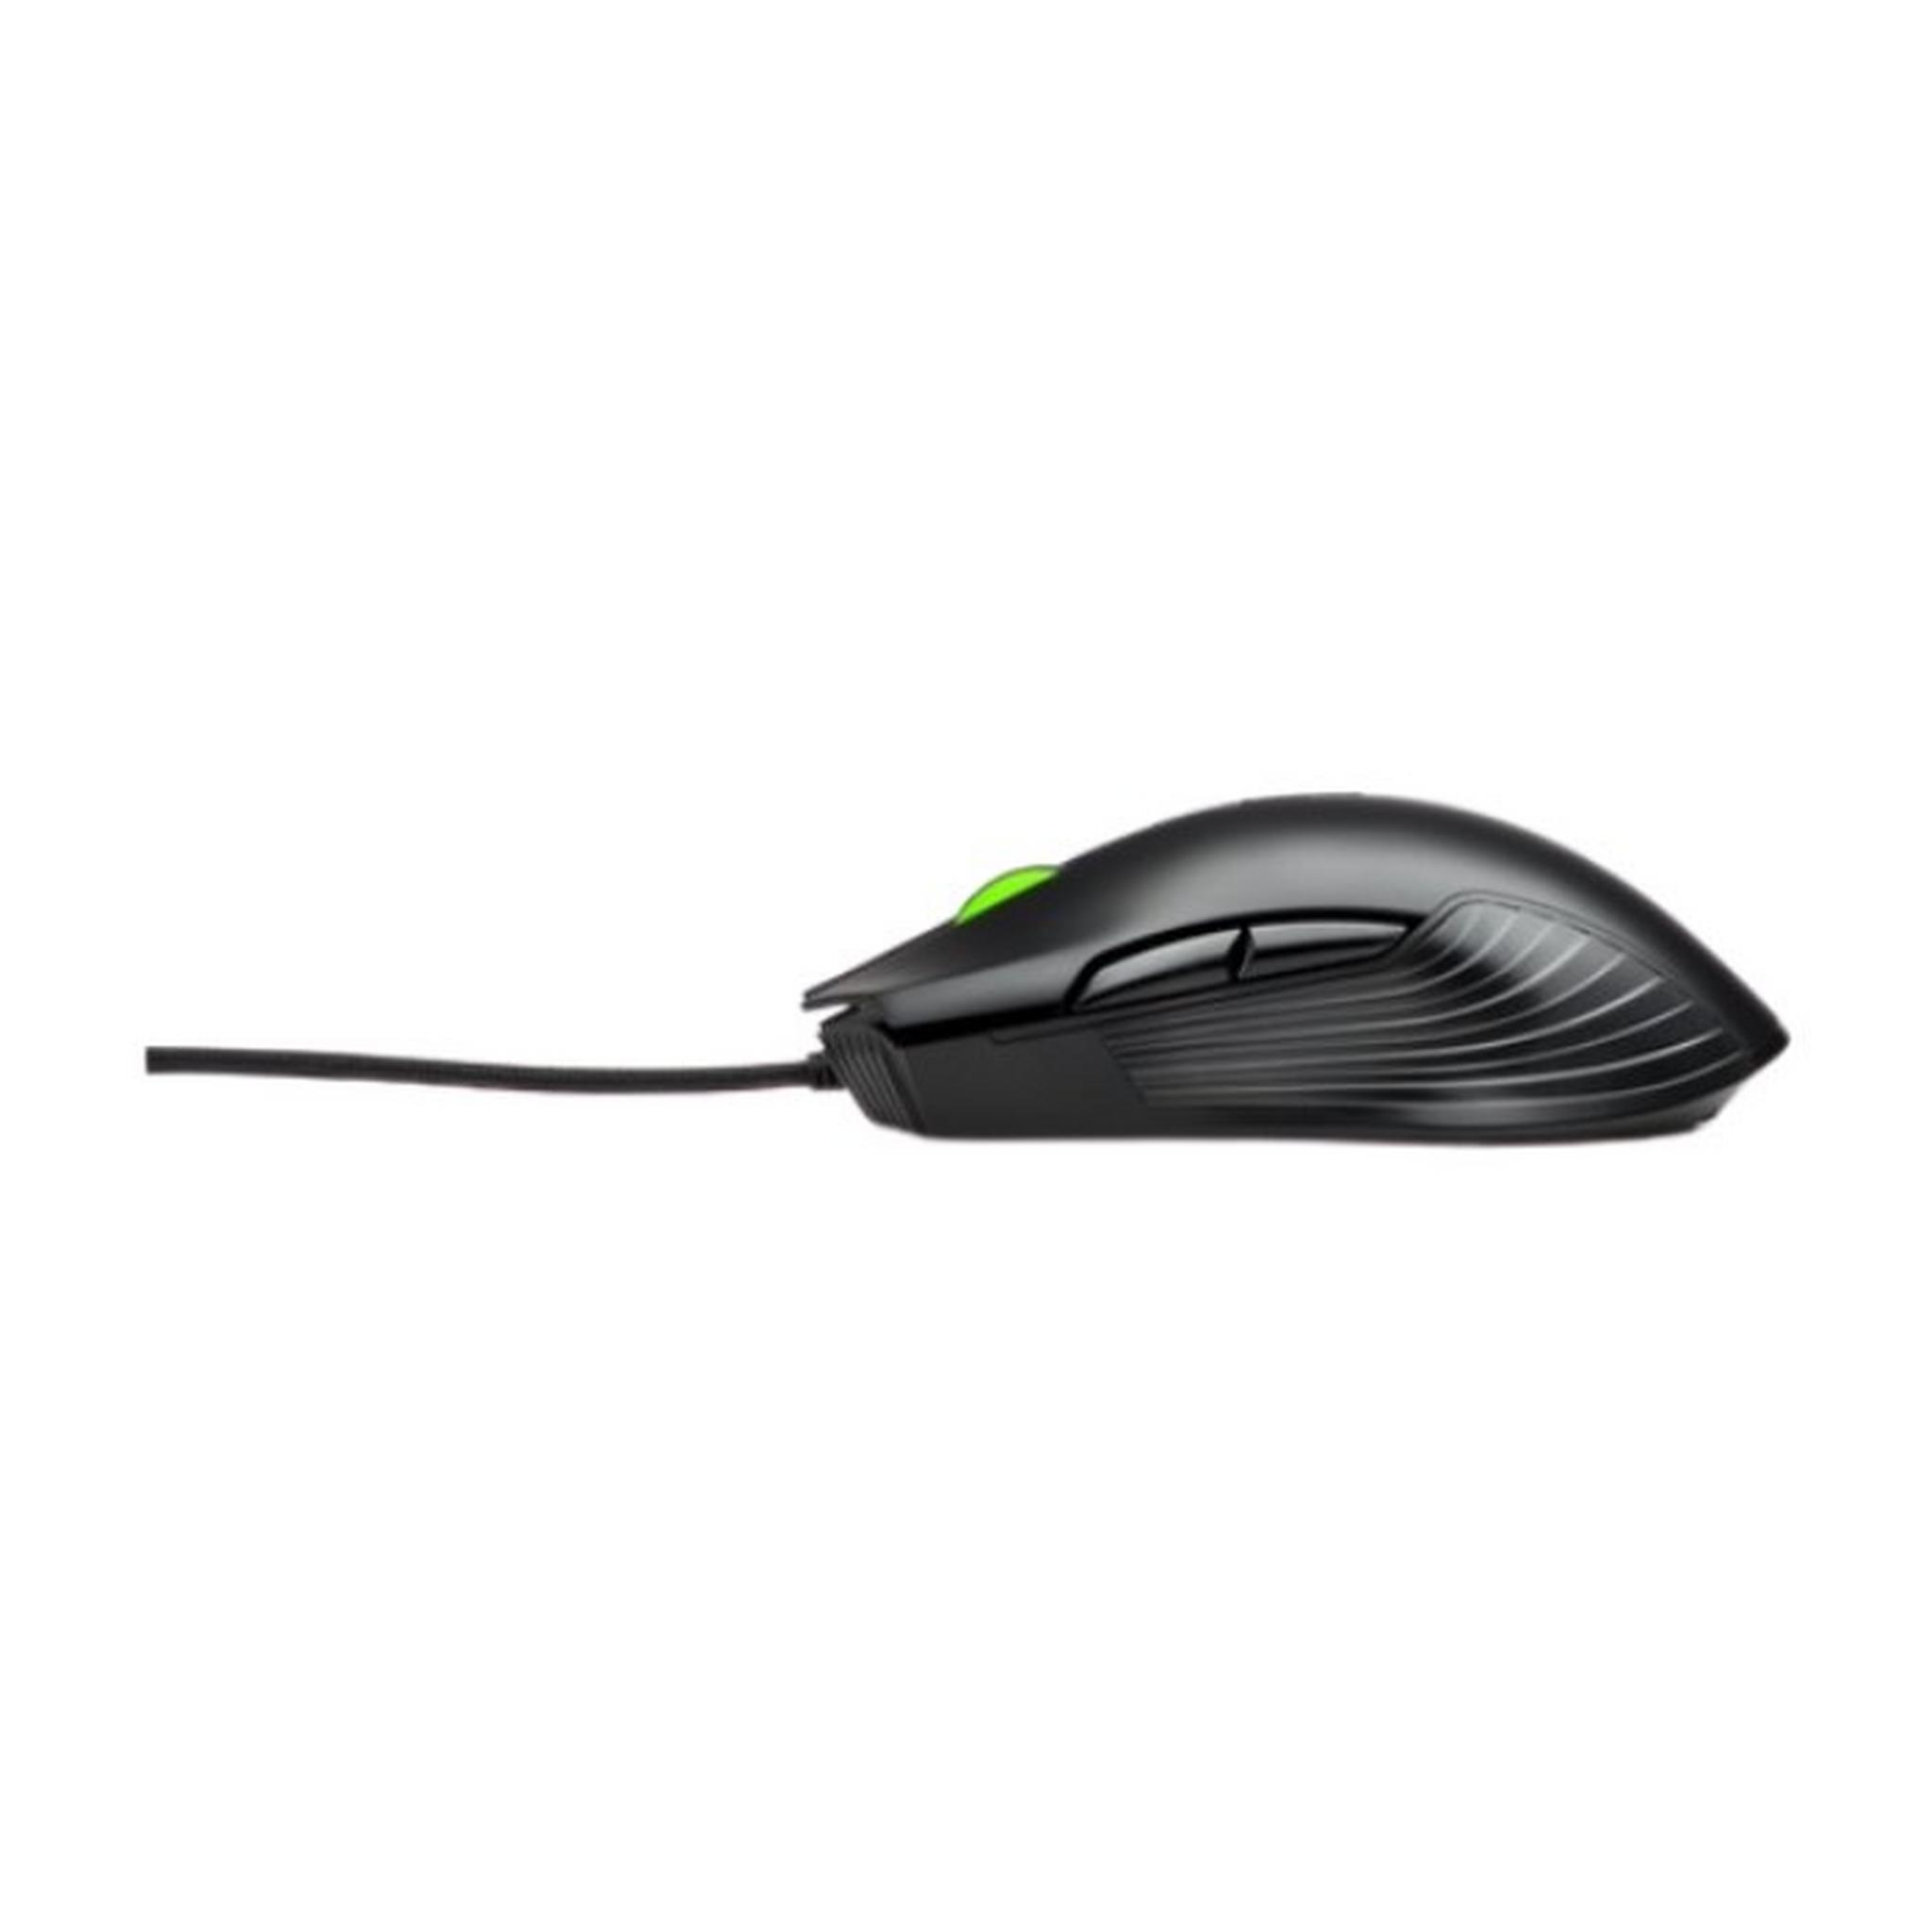 HP X220 Wired Backlit Gaming Mouse